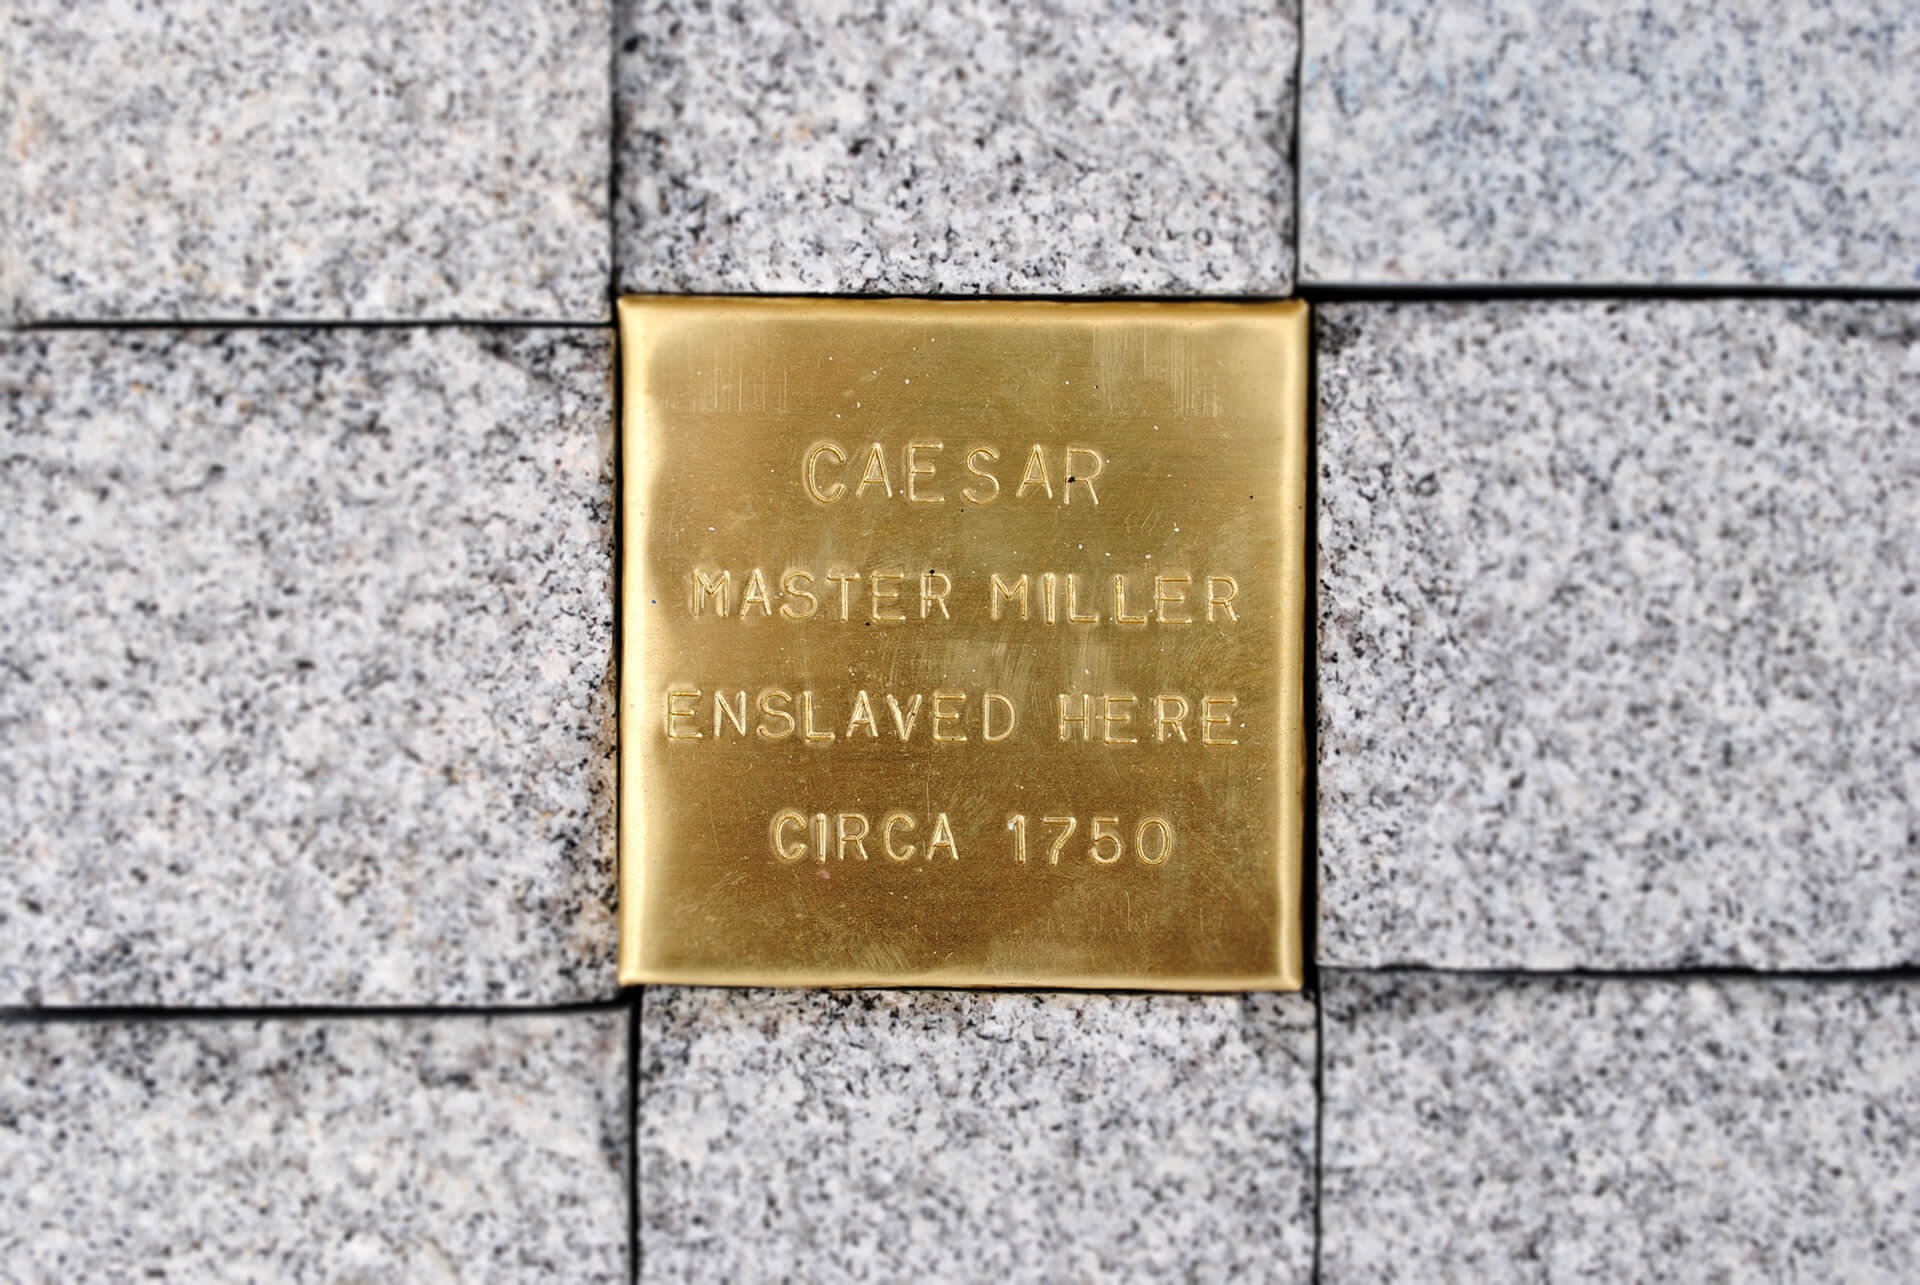 Commemorative plaque inlaid in cobblestone street and showing the name of a slave